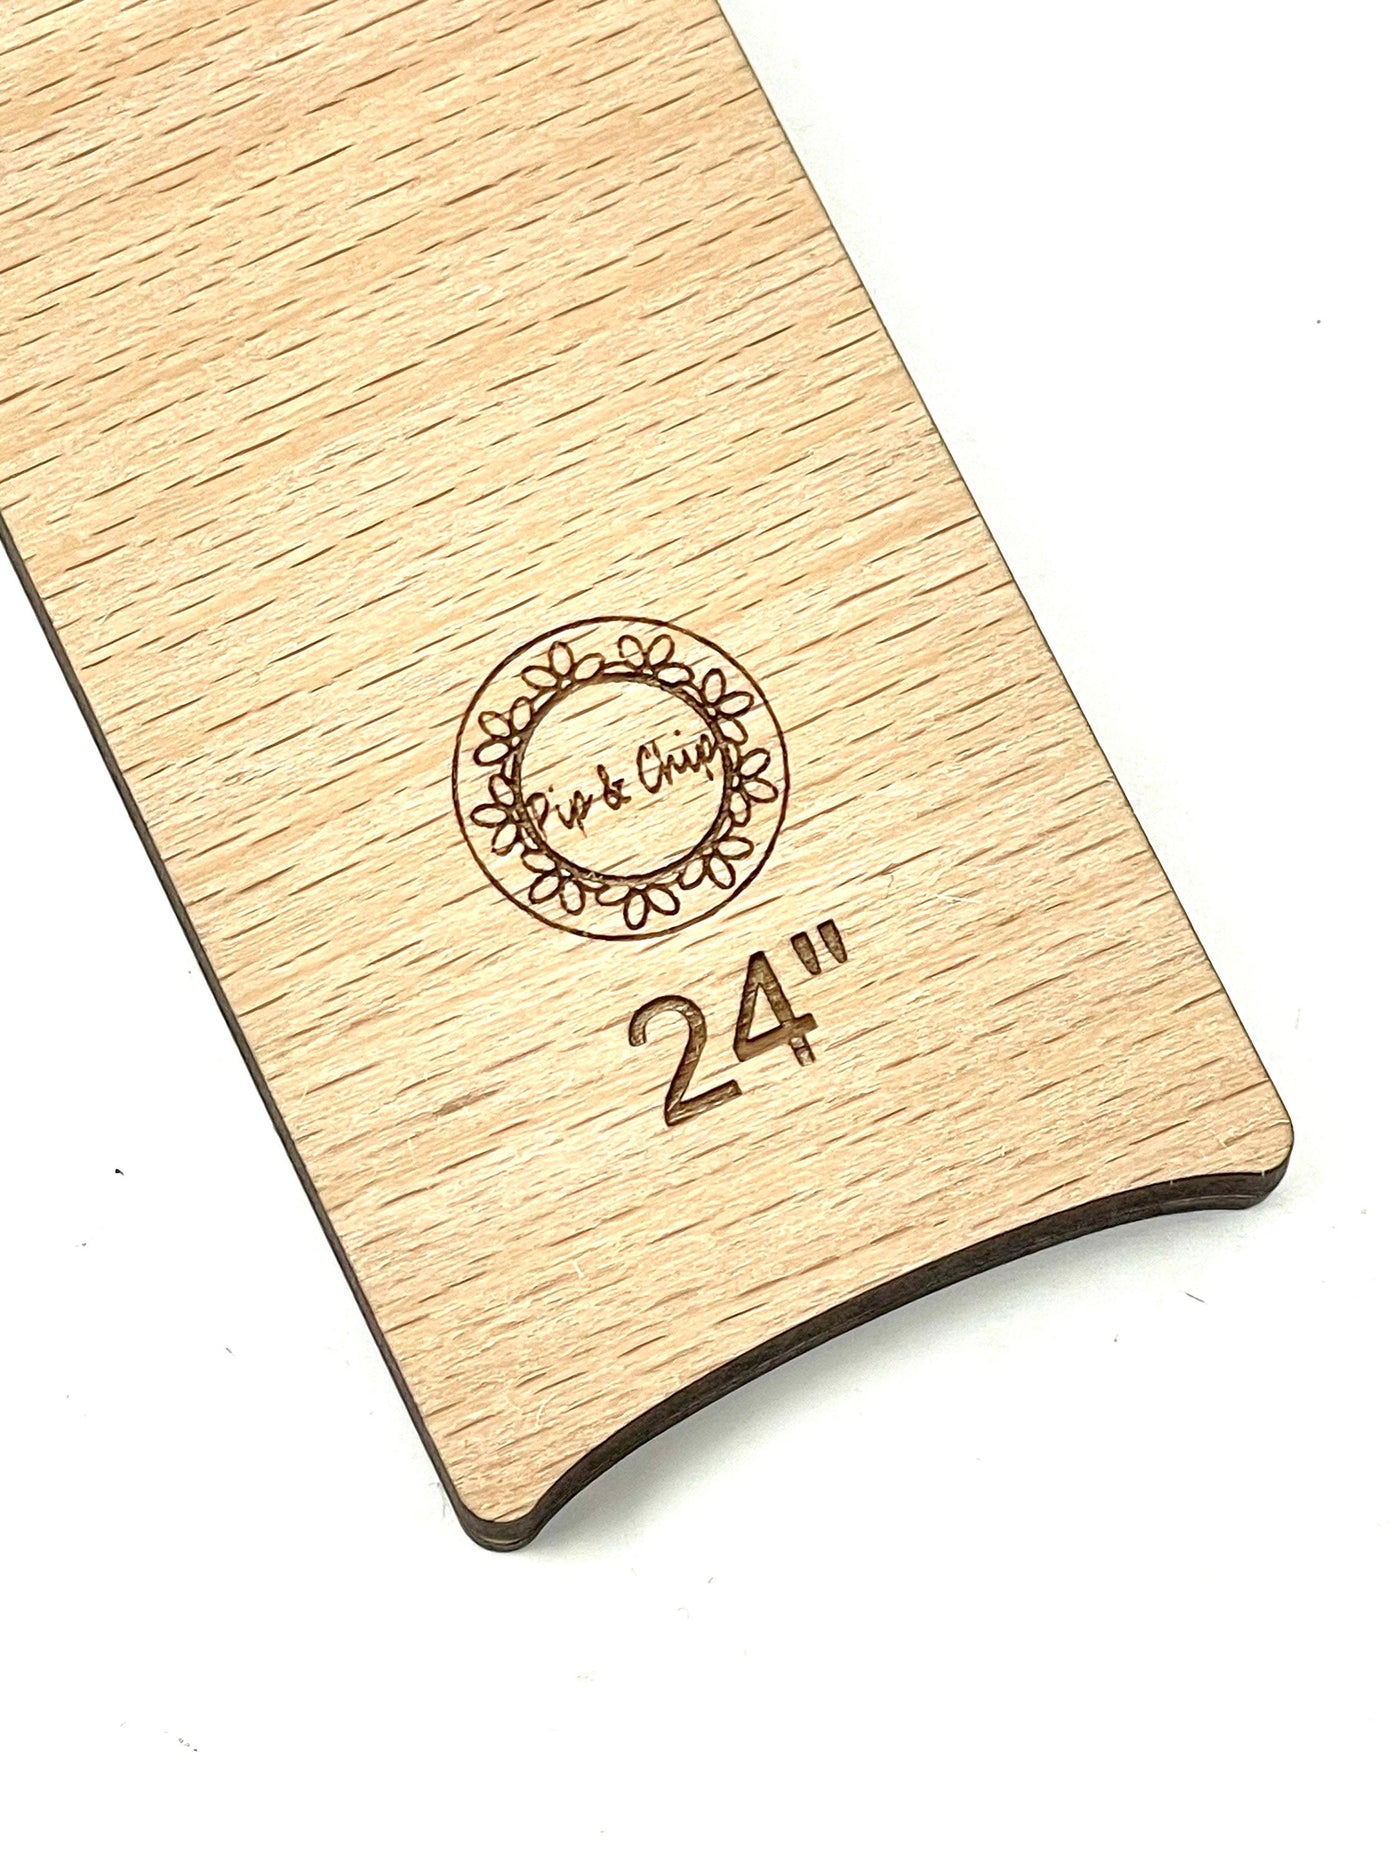 Wooden Floss ruler 12/24" or 18/36" - tool to help you cut your thread the same length every time